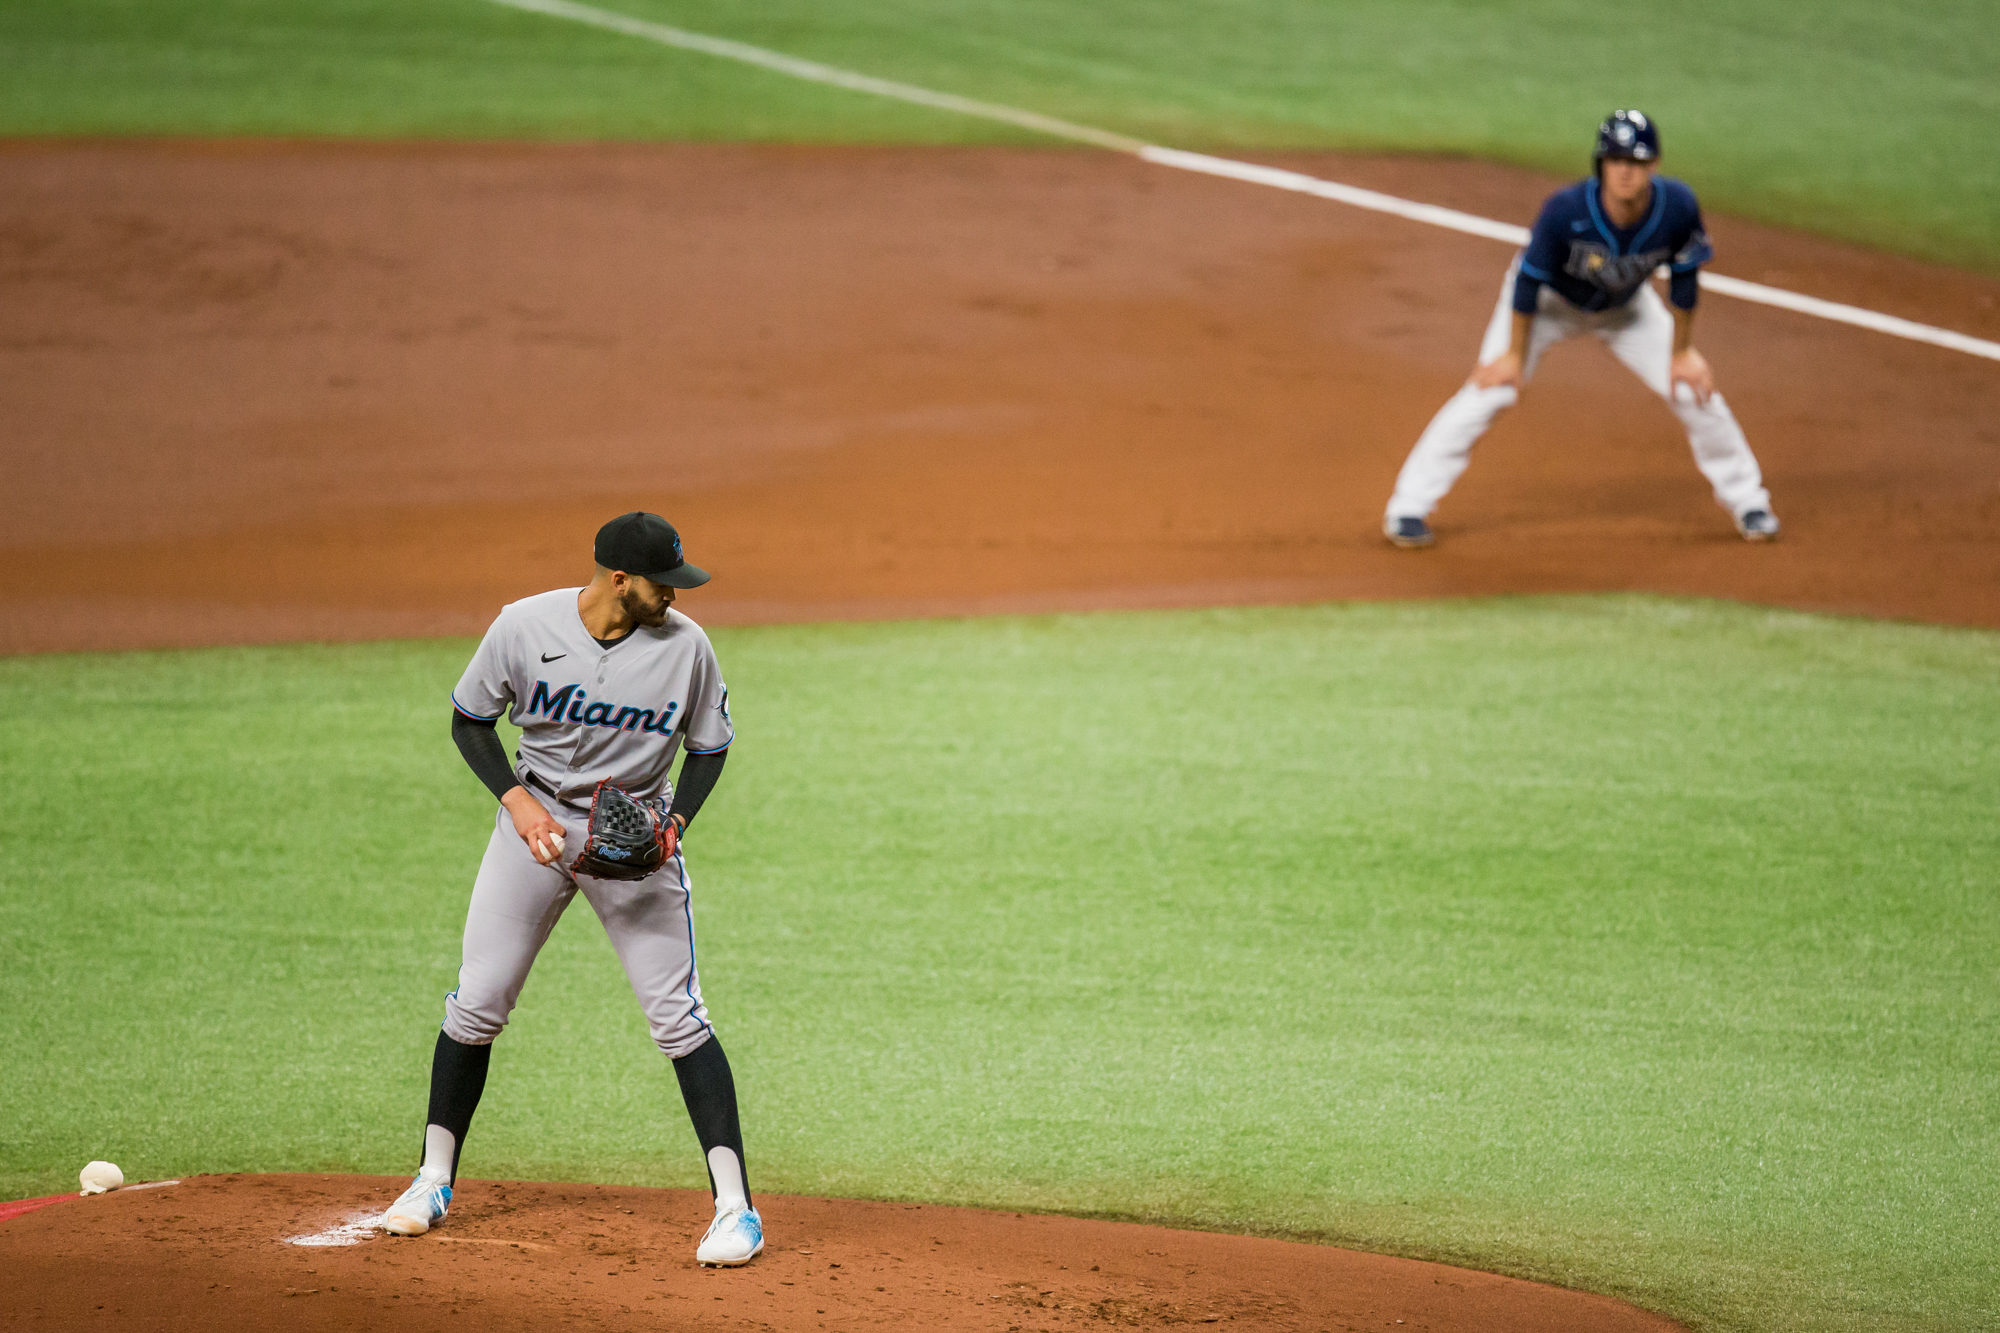 Miami Marlins starting pitcher Pablo Lopez (49) checks as Tampa Bay Rays third baseman Joey Wendle (18) leads off of first base during the first inning of a game at Tropicana Field.